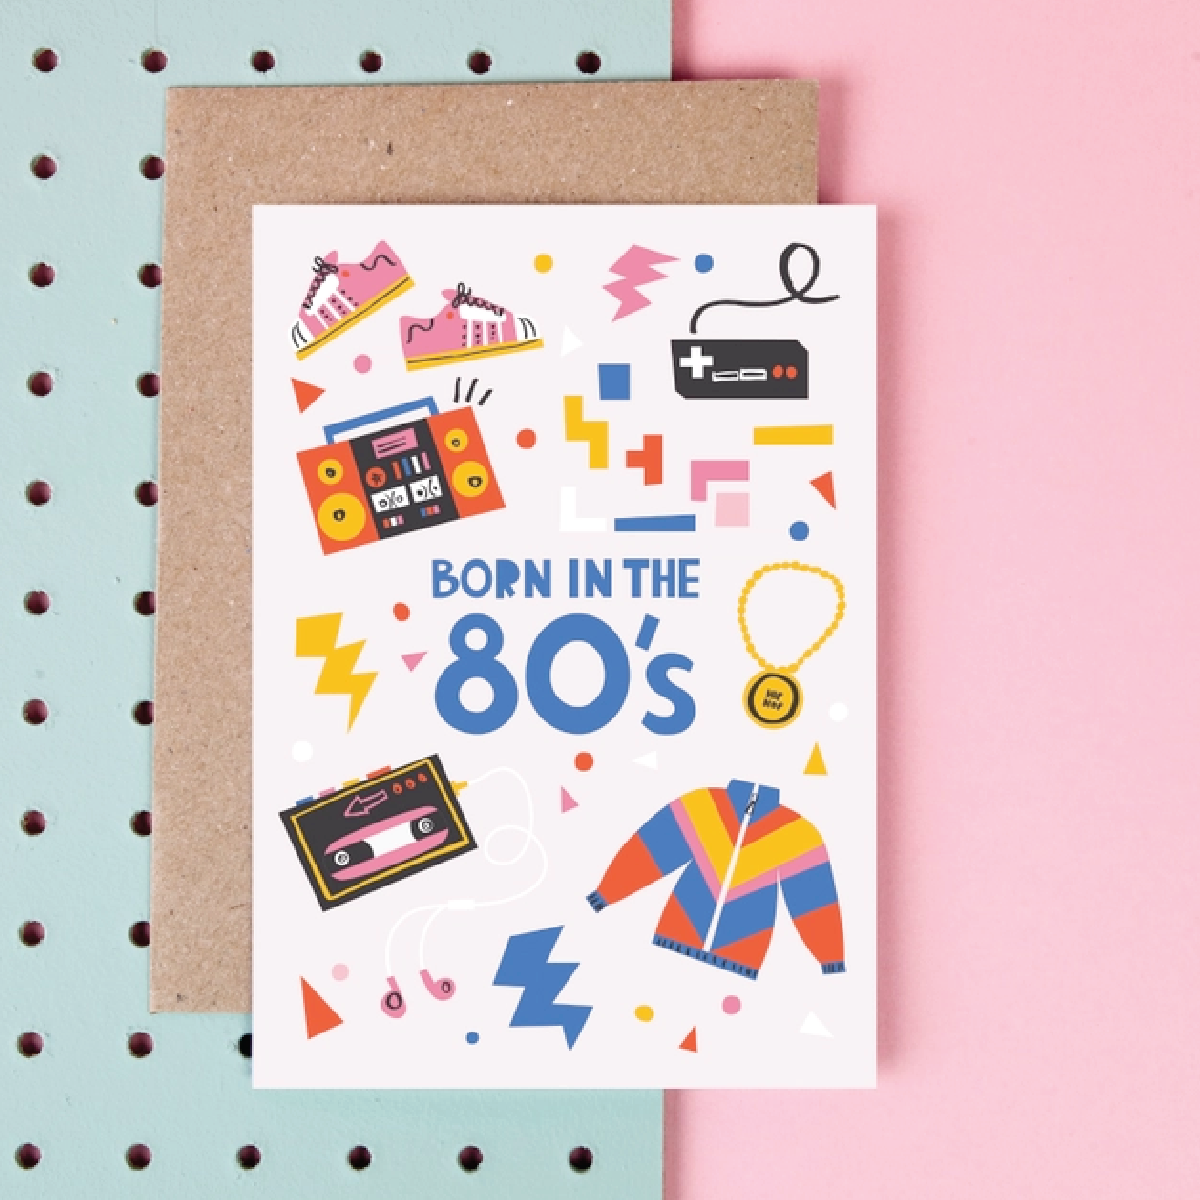 White card with blue text saying, “Born in the 80’s” Images of famous items from the 1980’s including a cassette tape, boom box, multicolored windbreaker jacket, video games, pink sneakers, and a gold necklace. Colored confetti and geometric shapes in background. A brown envelope is included.